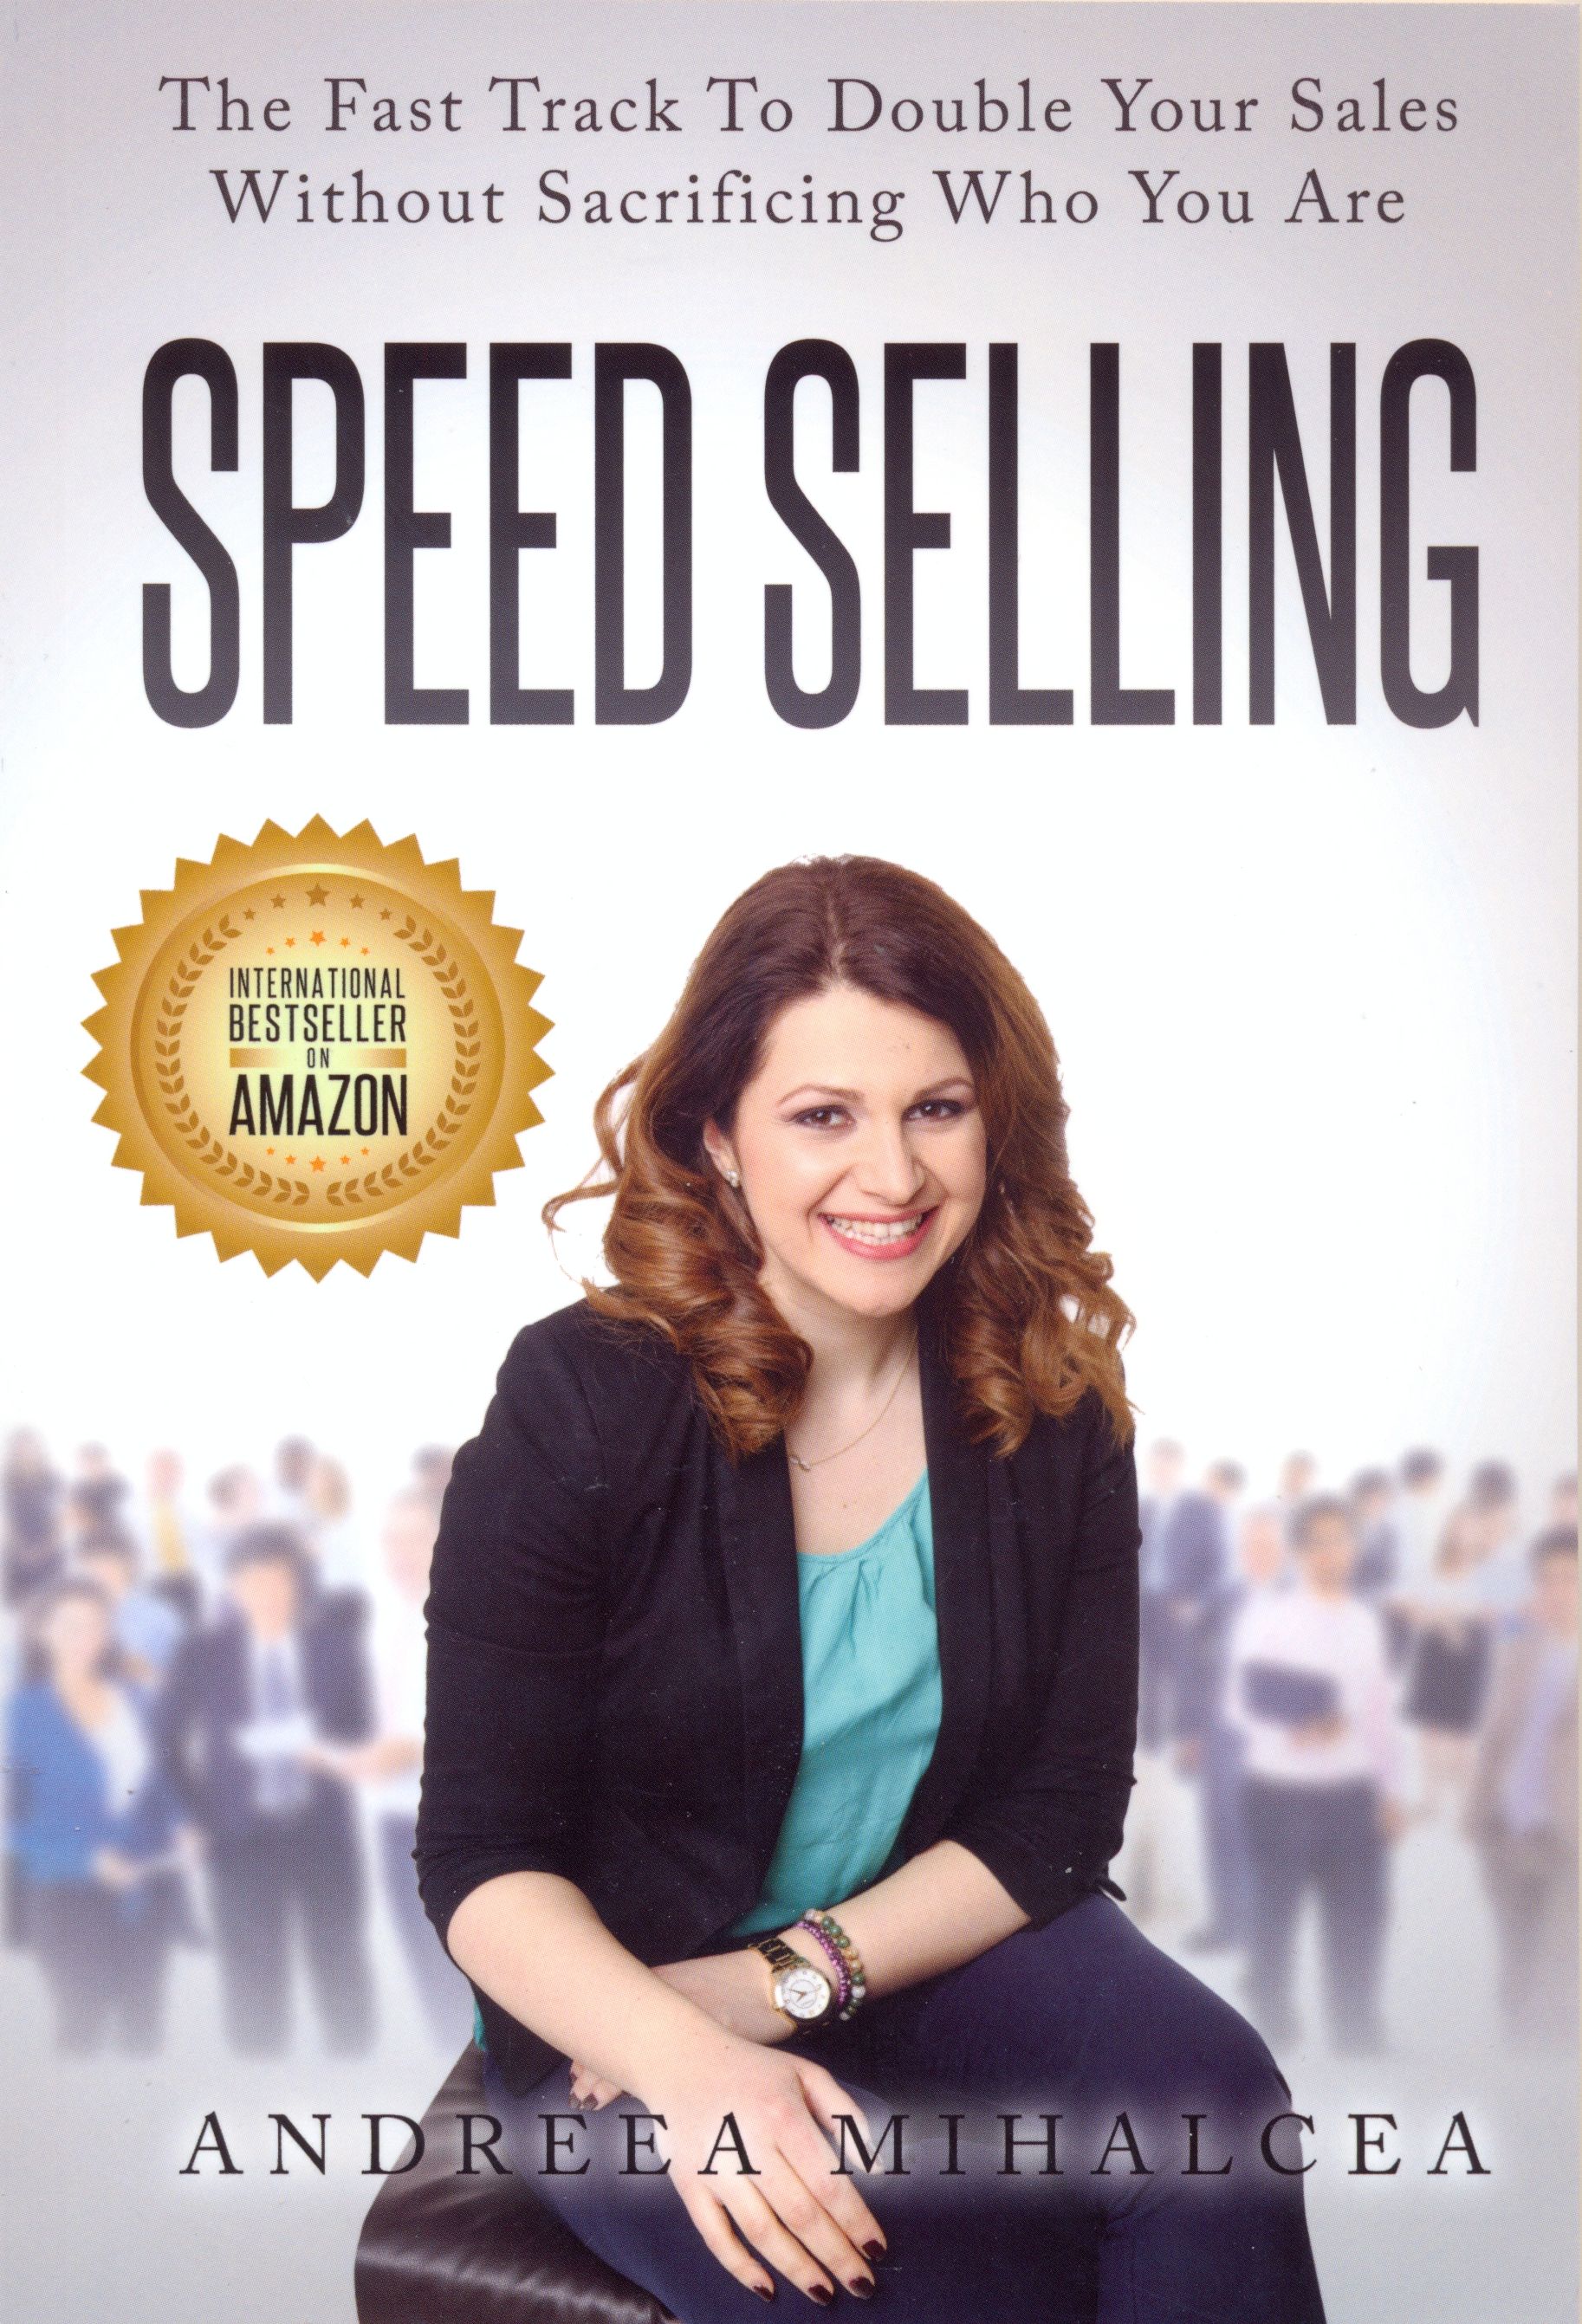 Speed selling